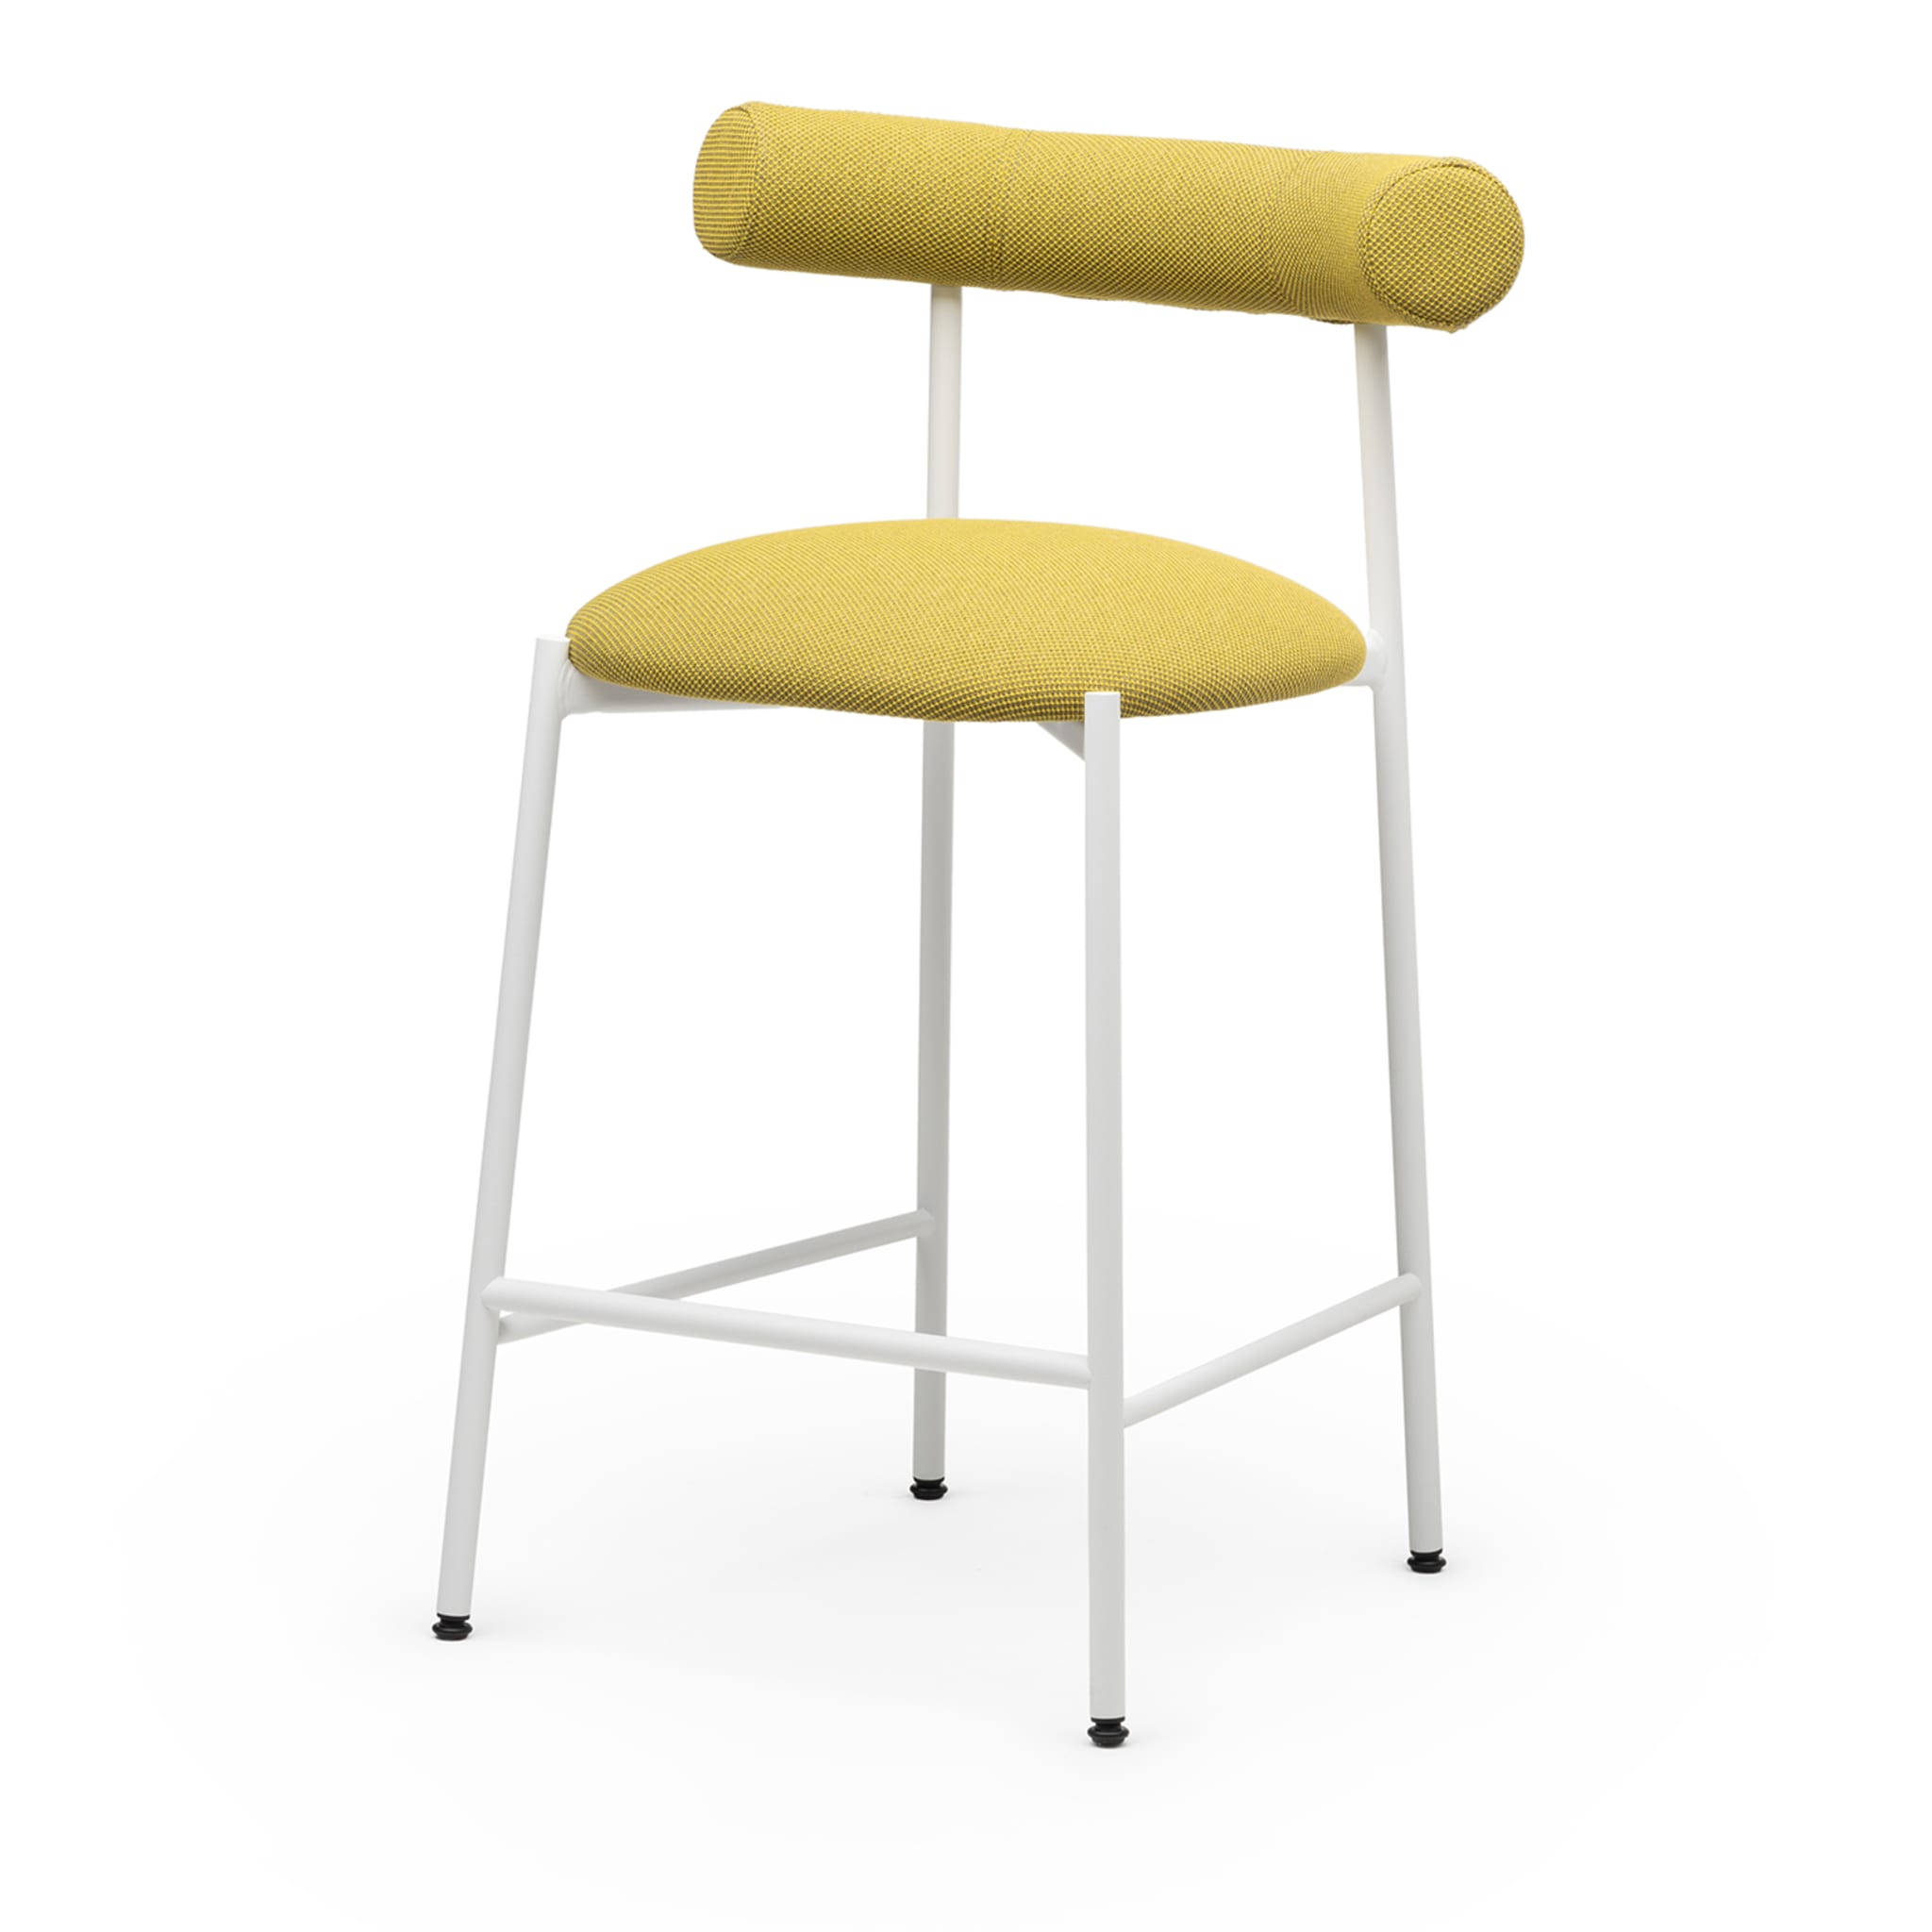 Pampa SG-65 Low Lime-Green & White Stool by Studio Pastina - Alternative view 1